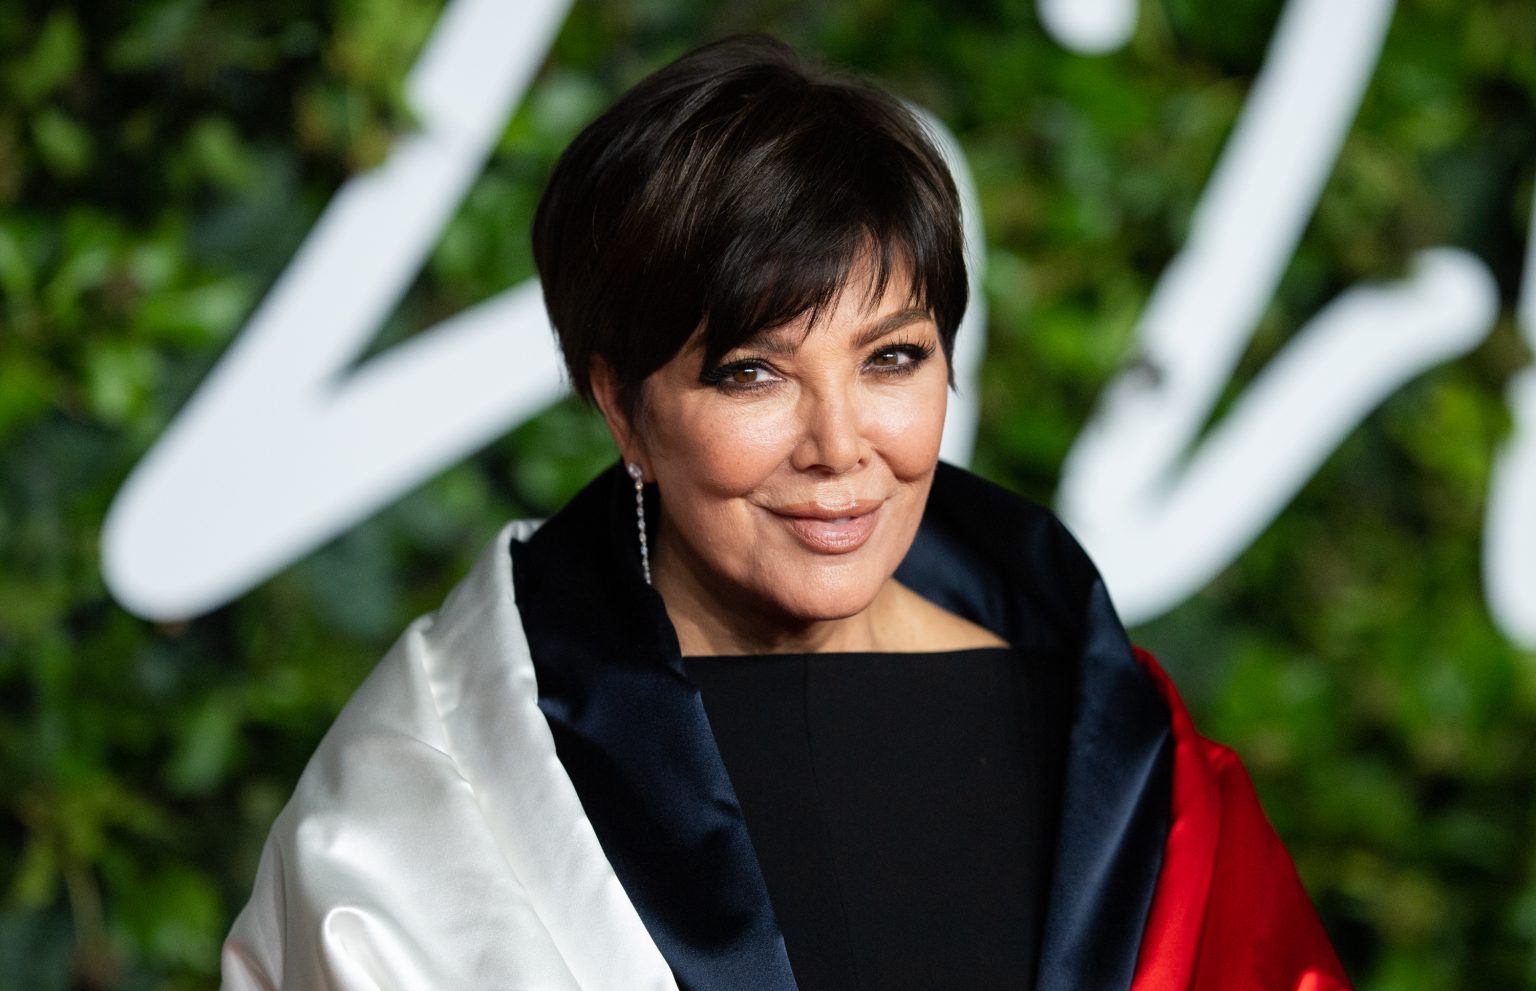 Who Is Marc Mcwilliams Bodyguard Who Accused Kris Jenner Of Sexual